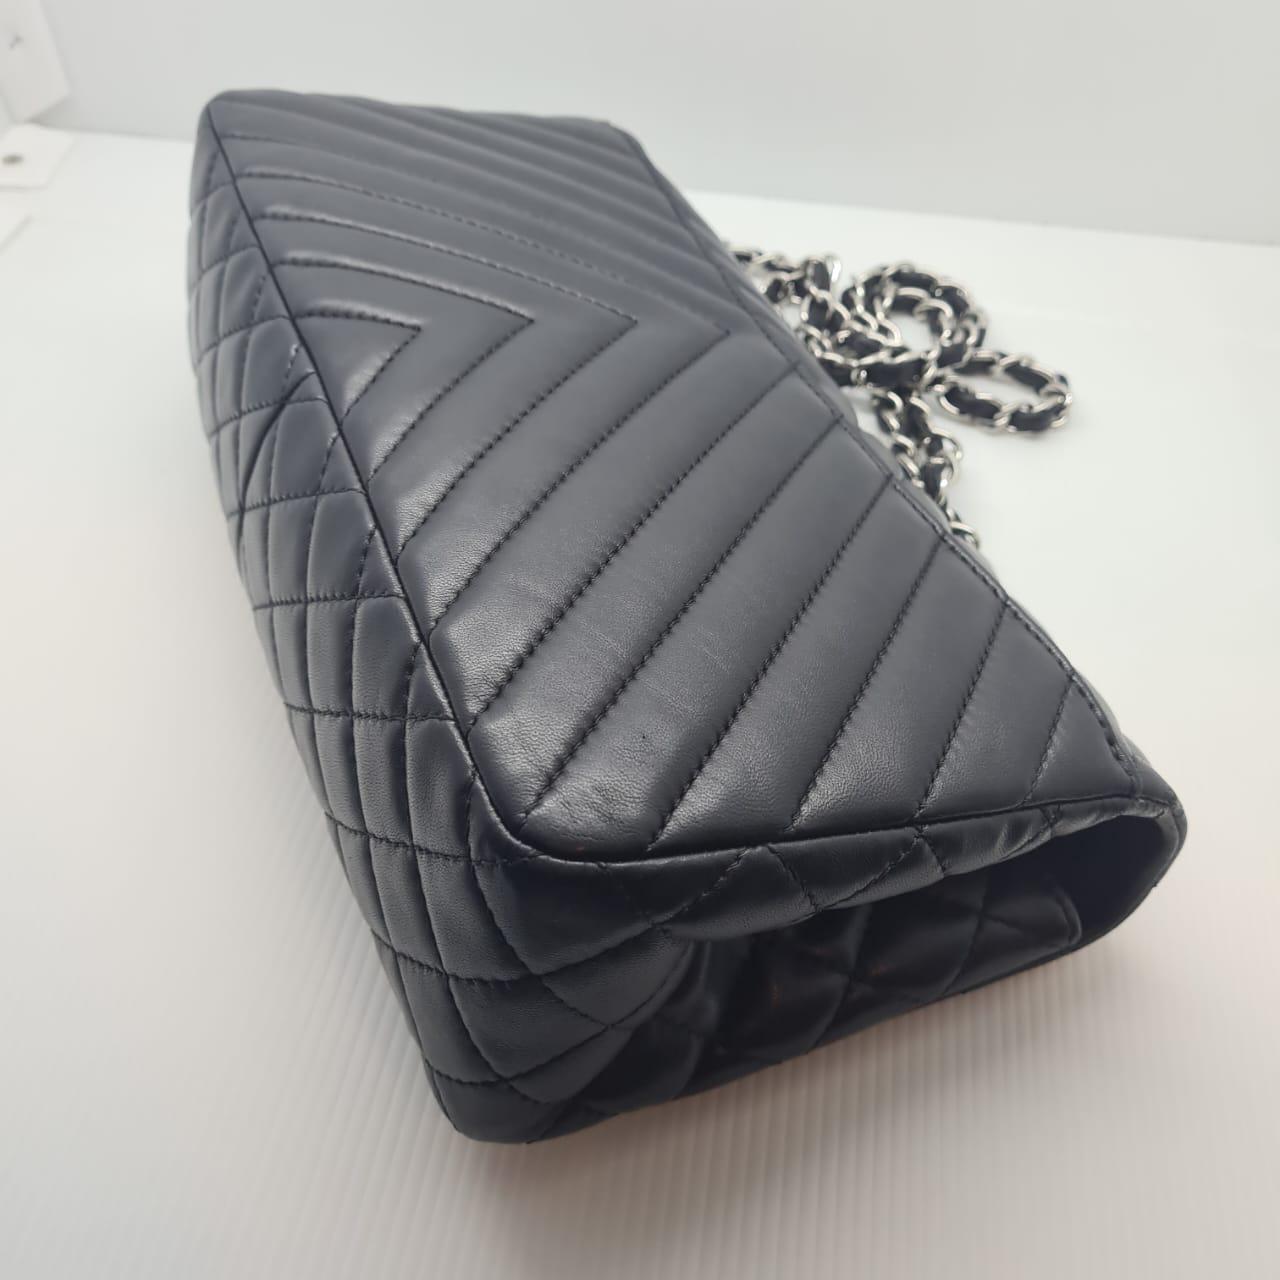 Beautiful large lambskin chevron flap bag in black. Minimal wear, with light scuffing on the leather surface and flap lining. Overall normal wear throughout, nothing major. Series #17. Comes with card and dust bag.